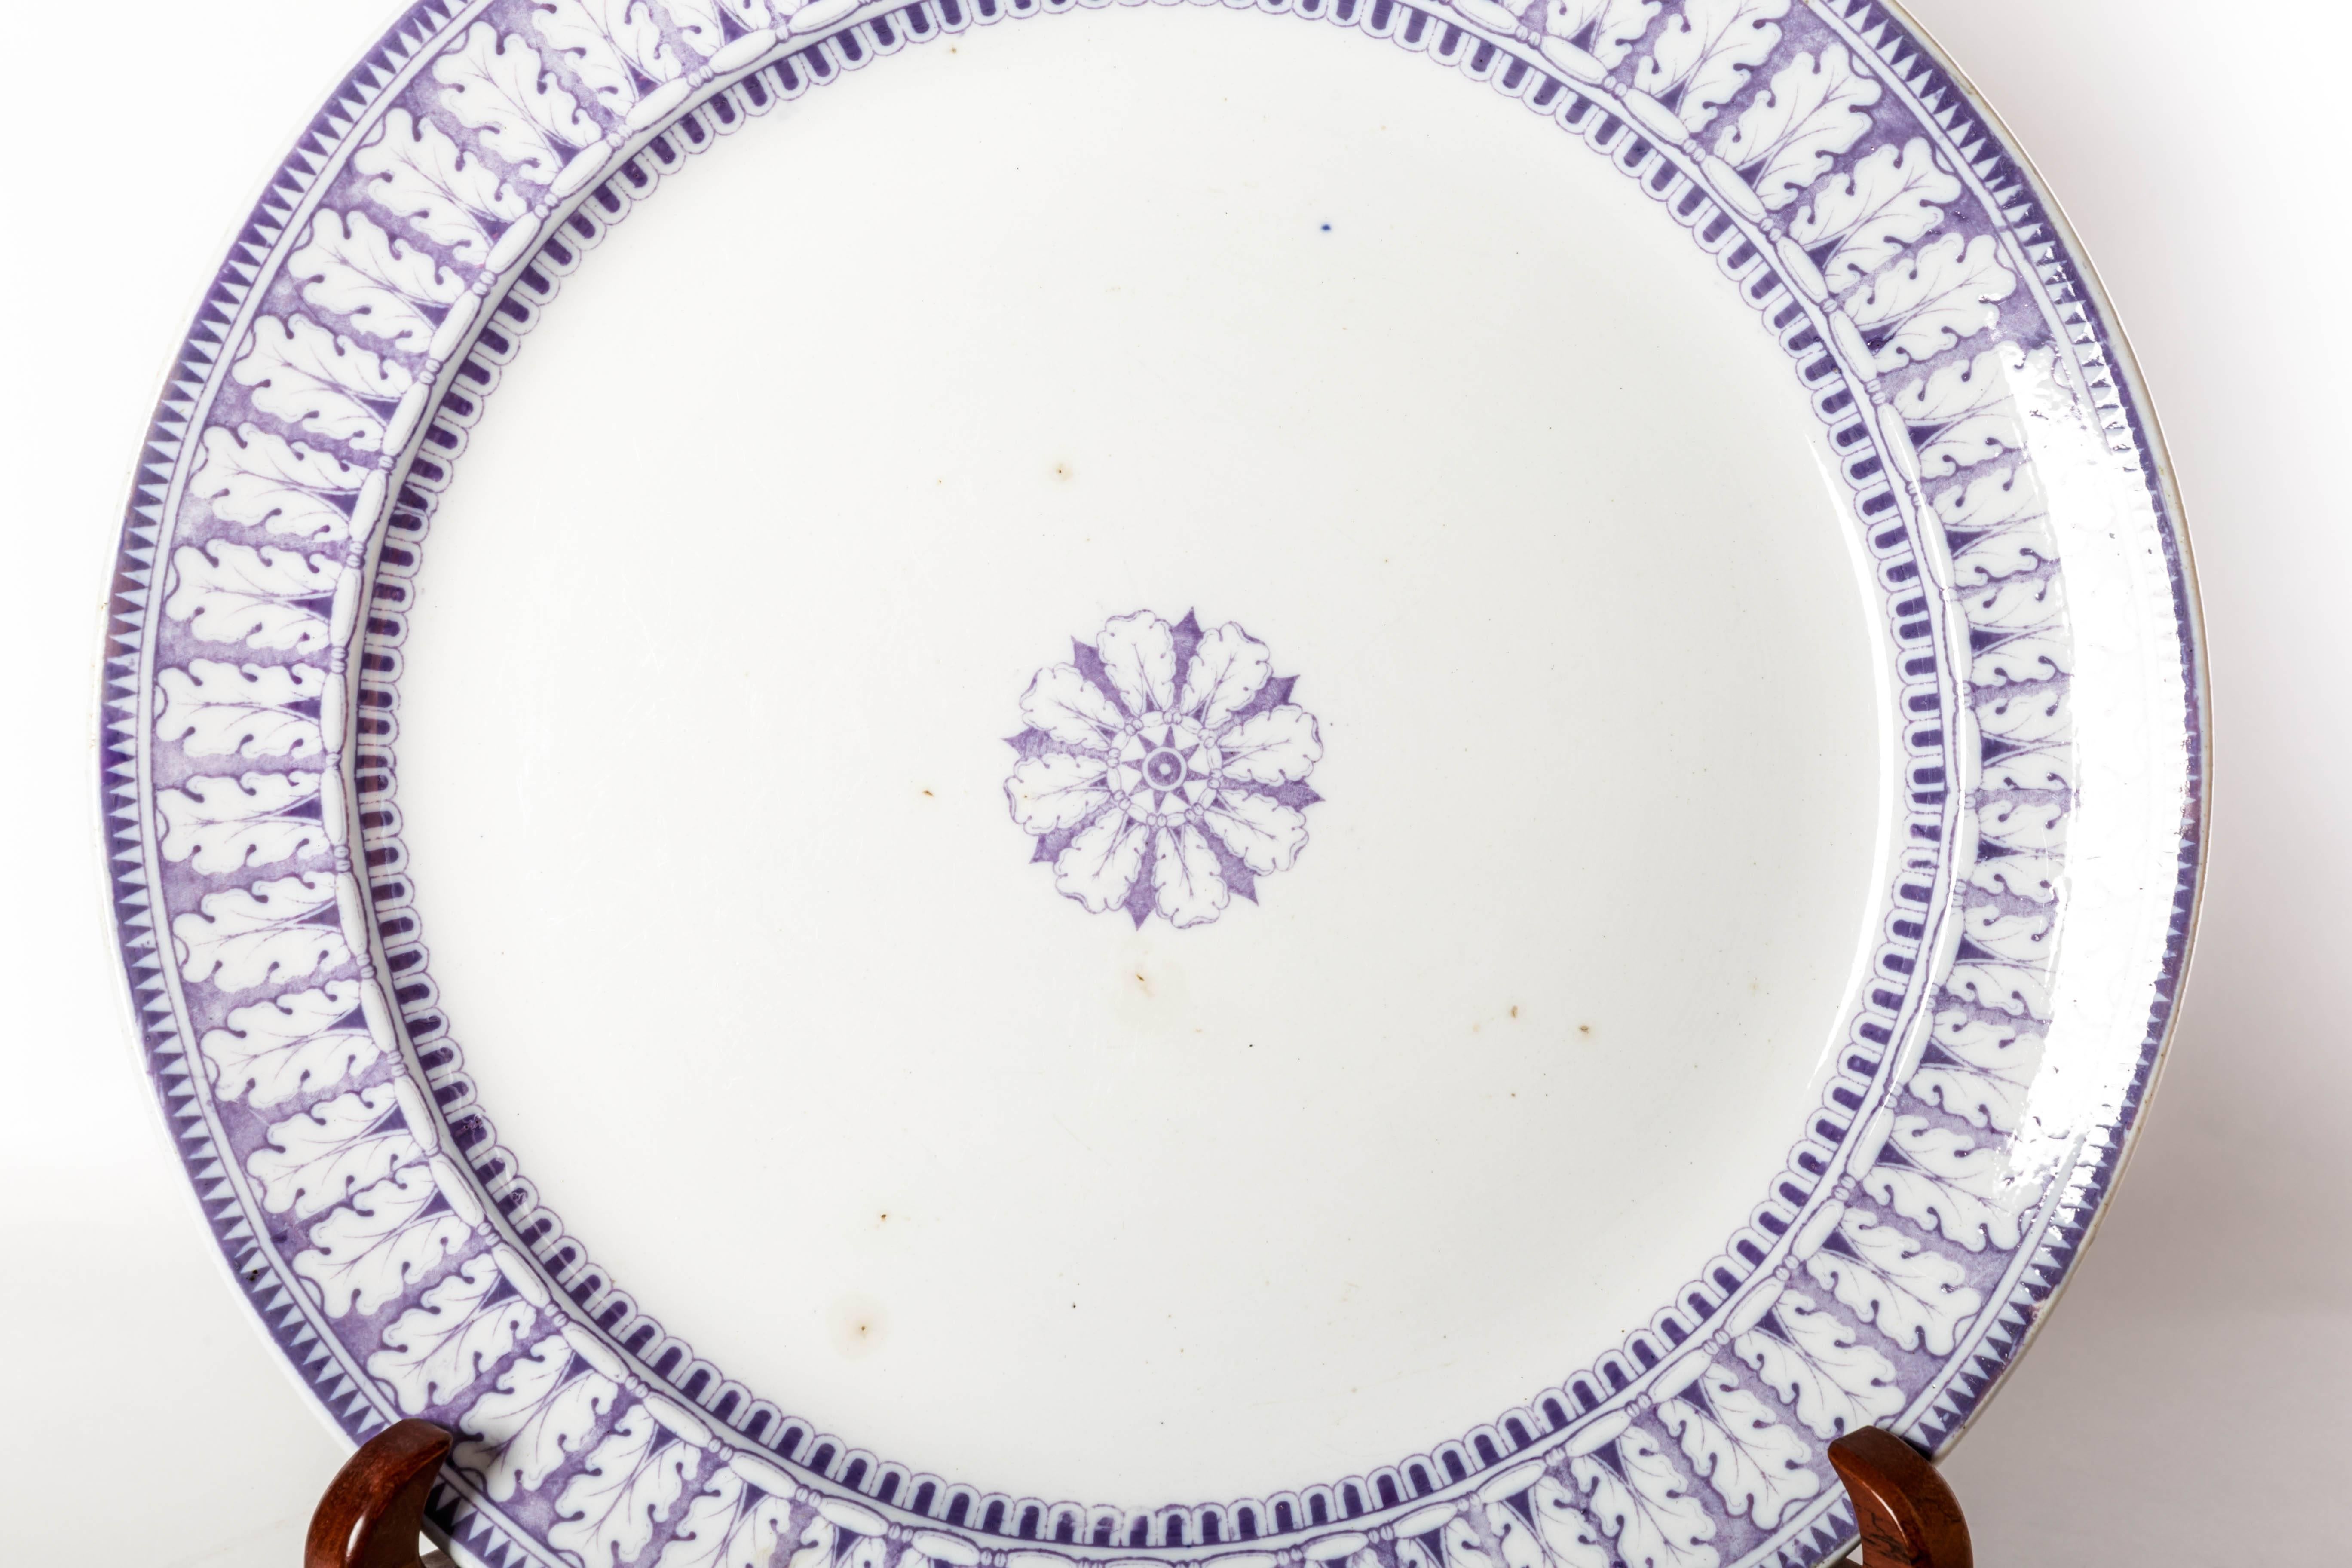 English large acanthe pattern blue and white transfer ware circular platter. This unusually large circular platter has a very decorative 2.5 boarder of stylized acanthus leaves centered by star medallion with radiating acanthus leaves. The back is